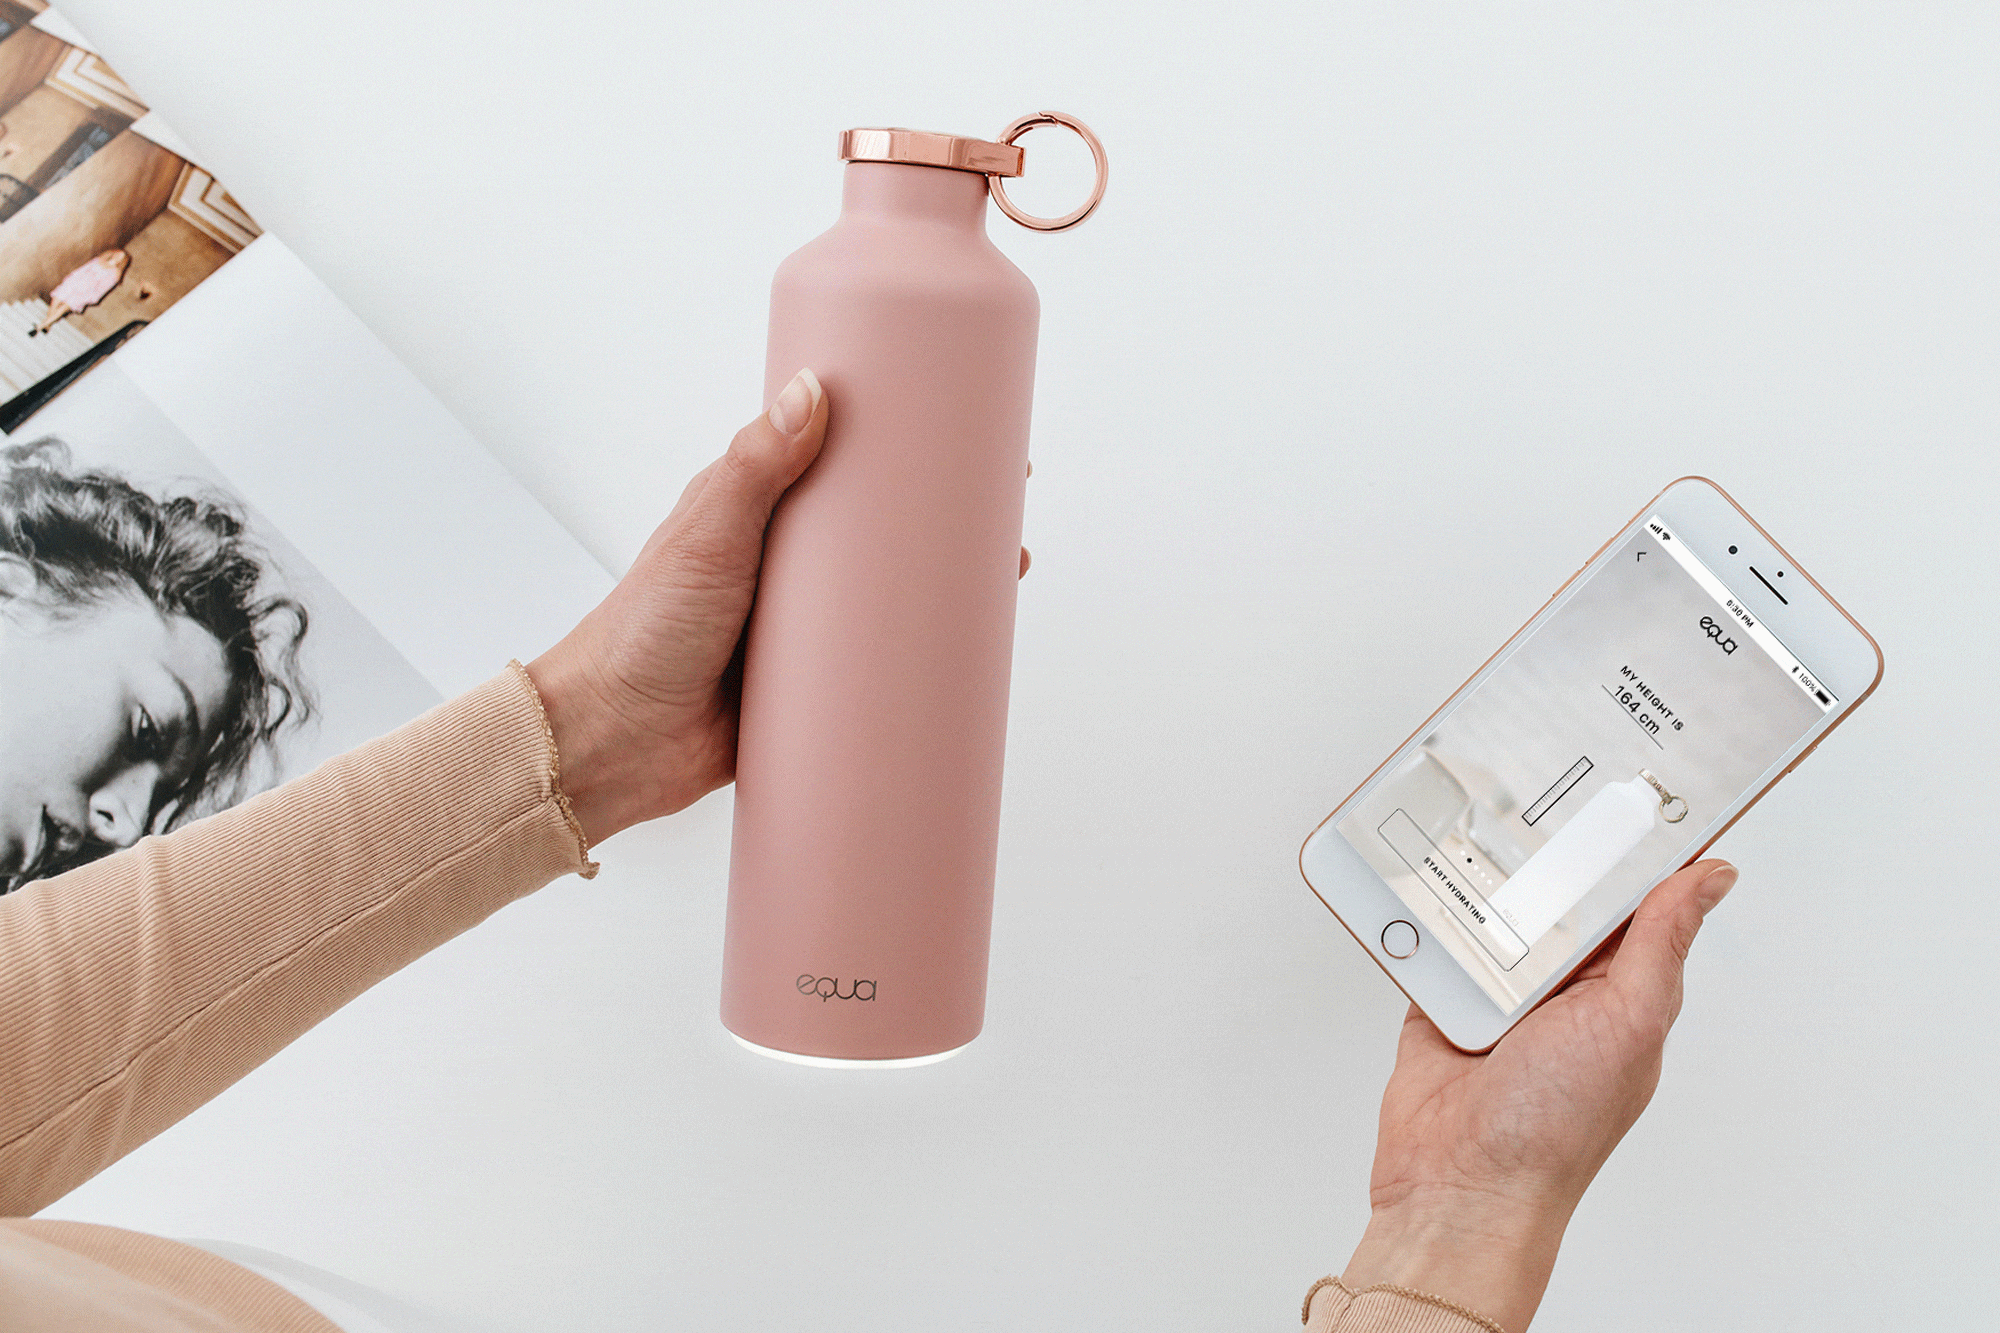 Giotto Leakproof Smart Water Bottle